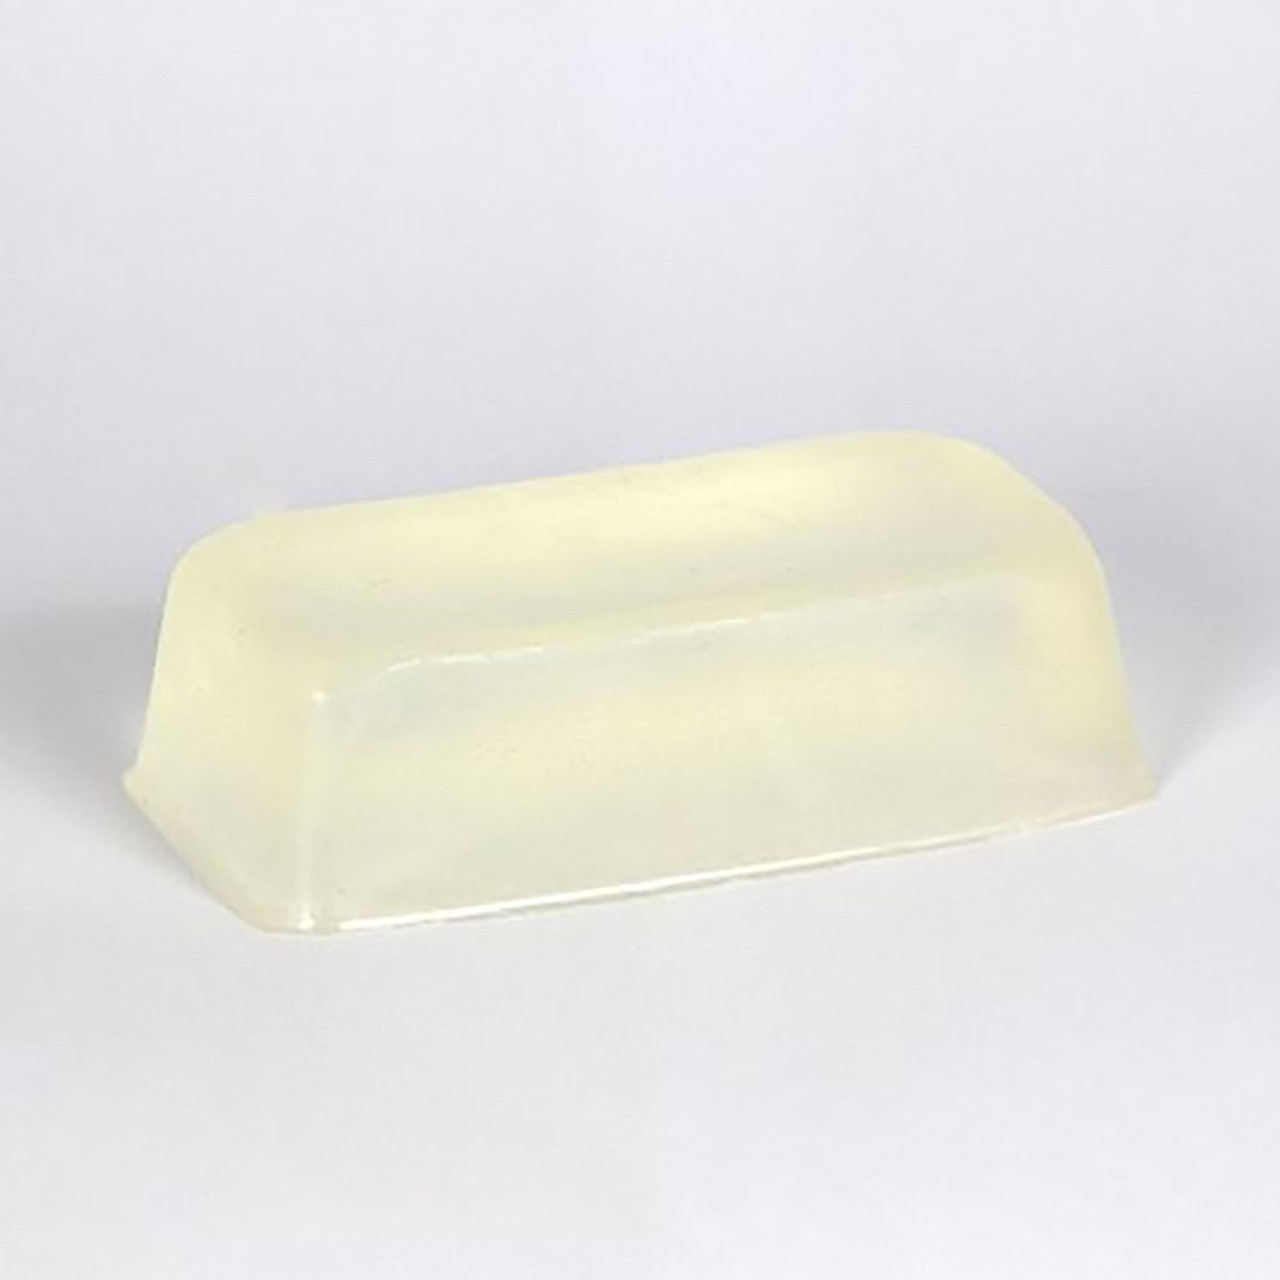 Melt and Pour Soap Base- White Opaque Soap Making SLS Free